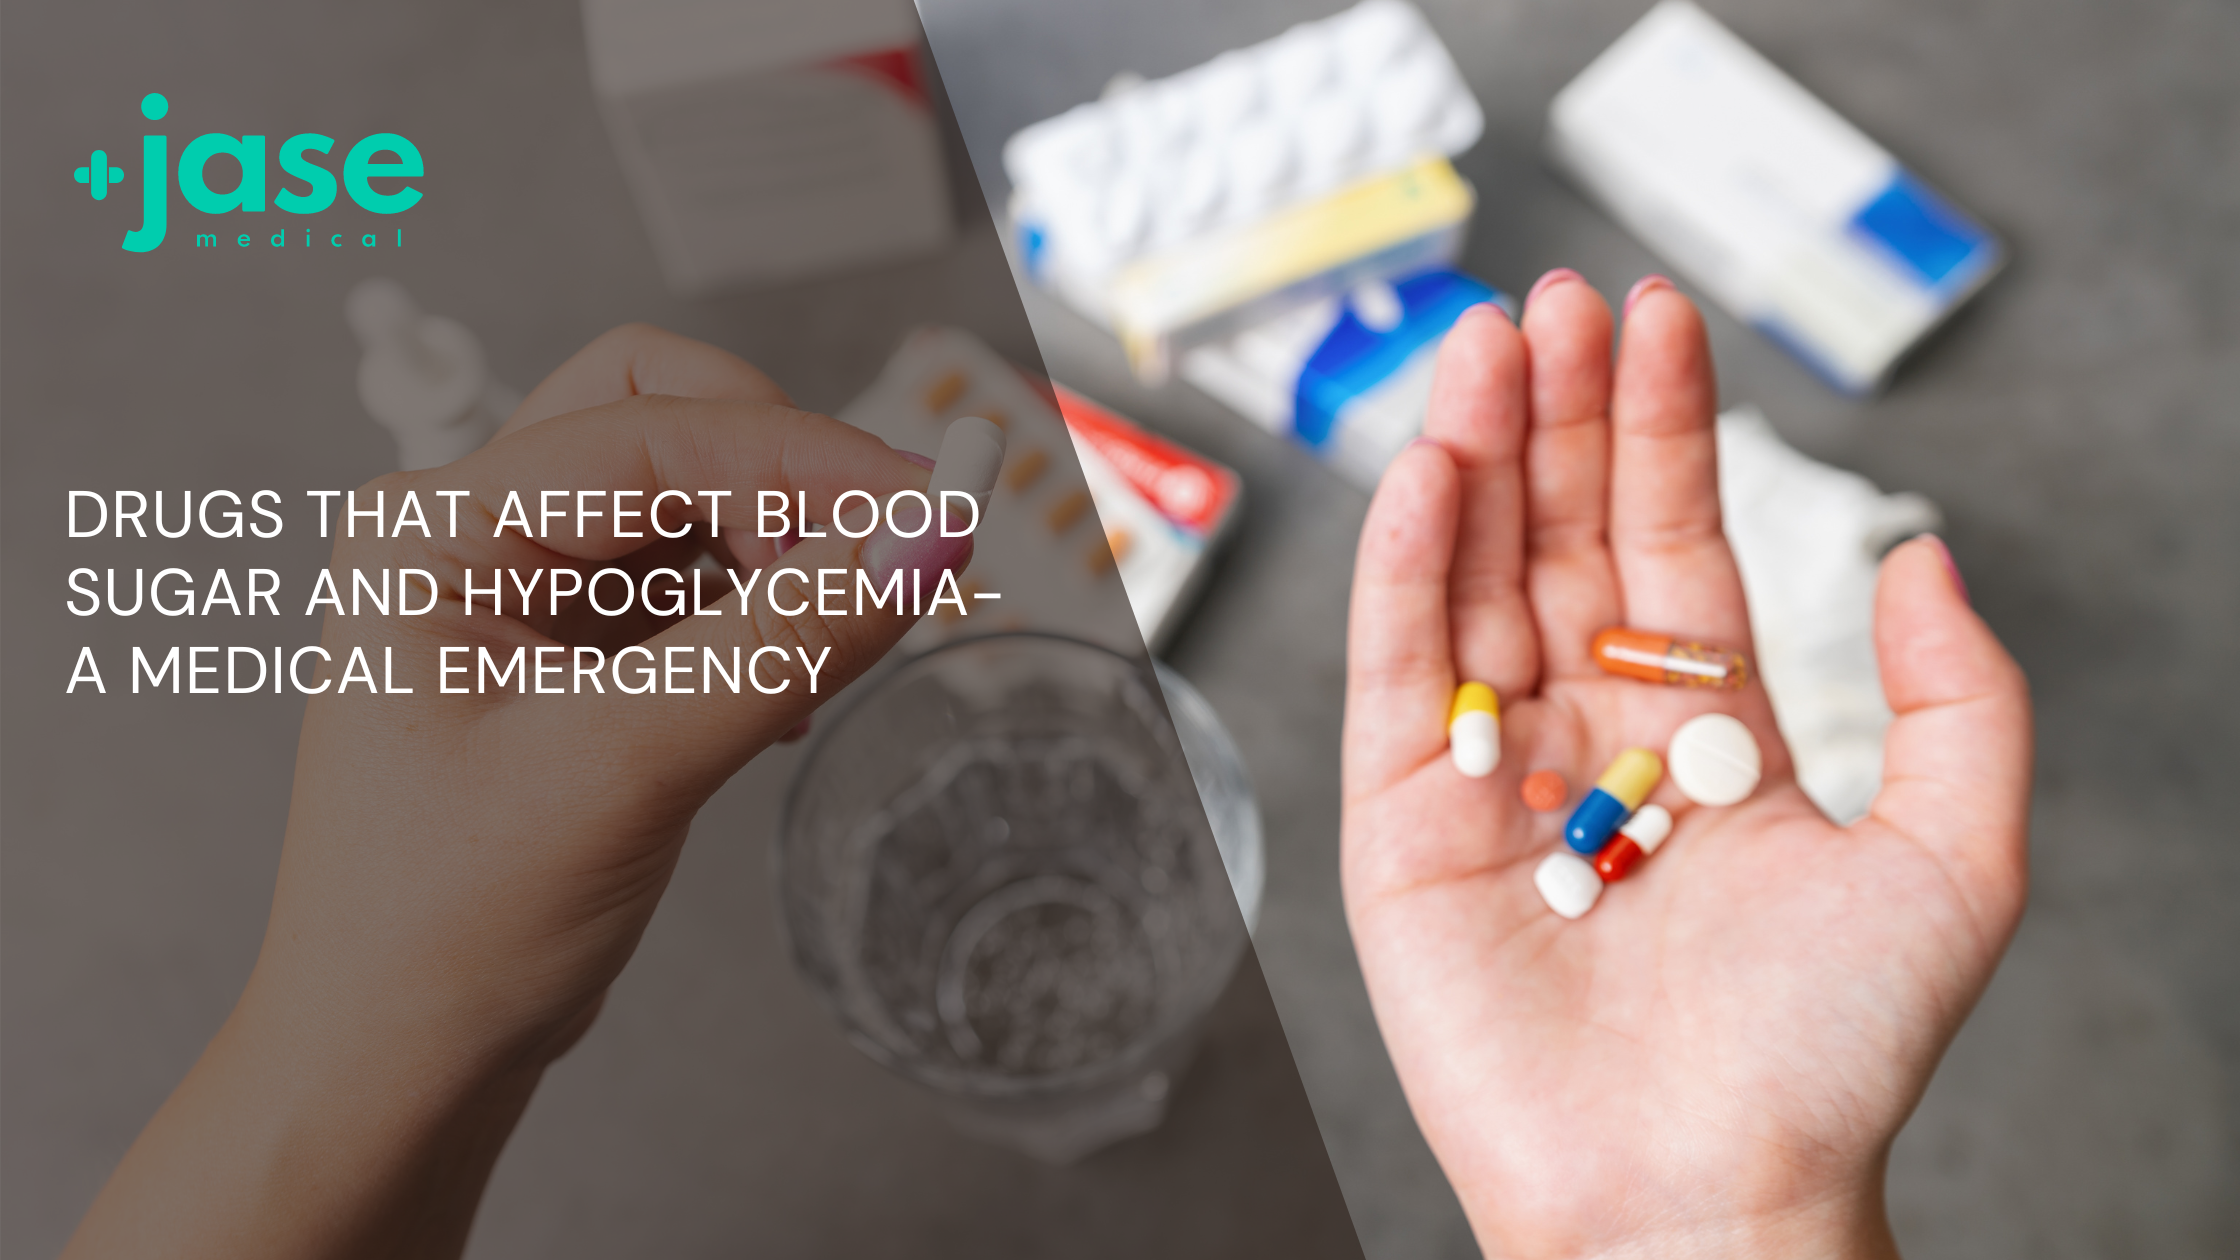 Drugs That Affect Blood Sugar and Hypoglycemia- A Medical Emergency